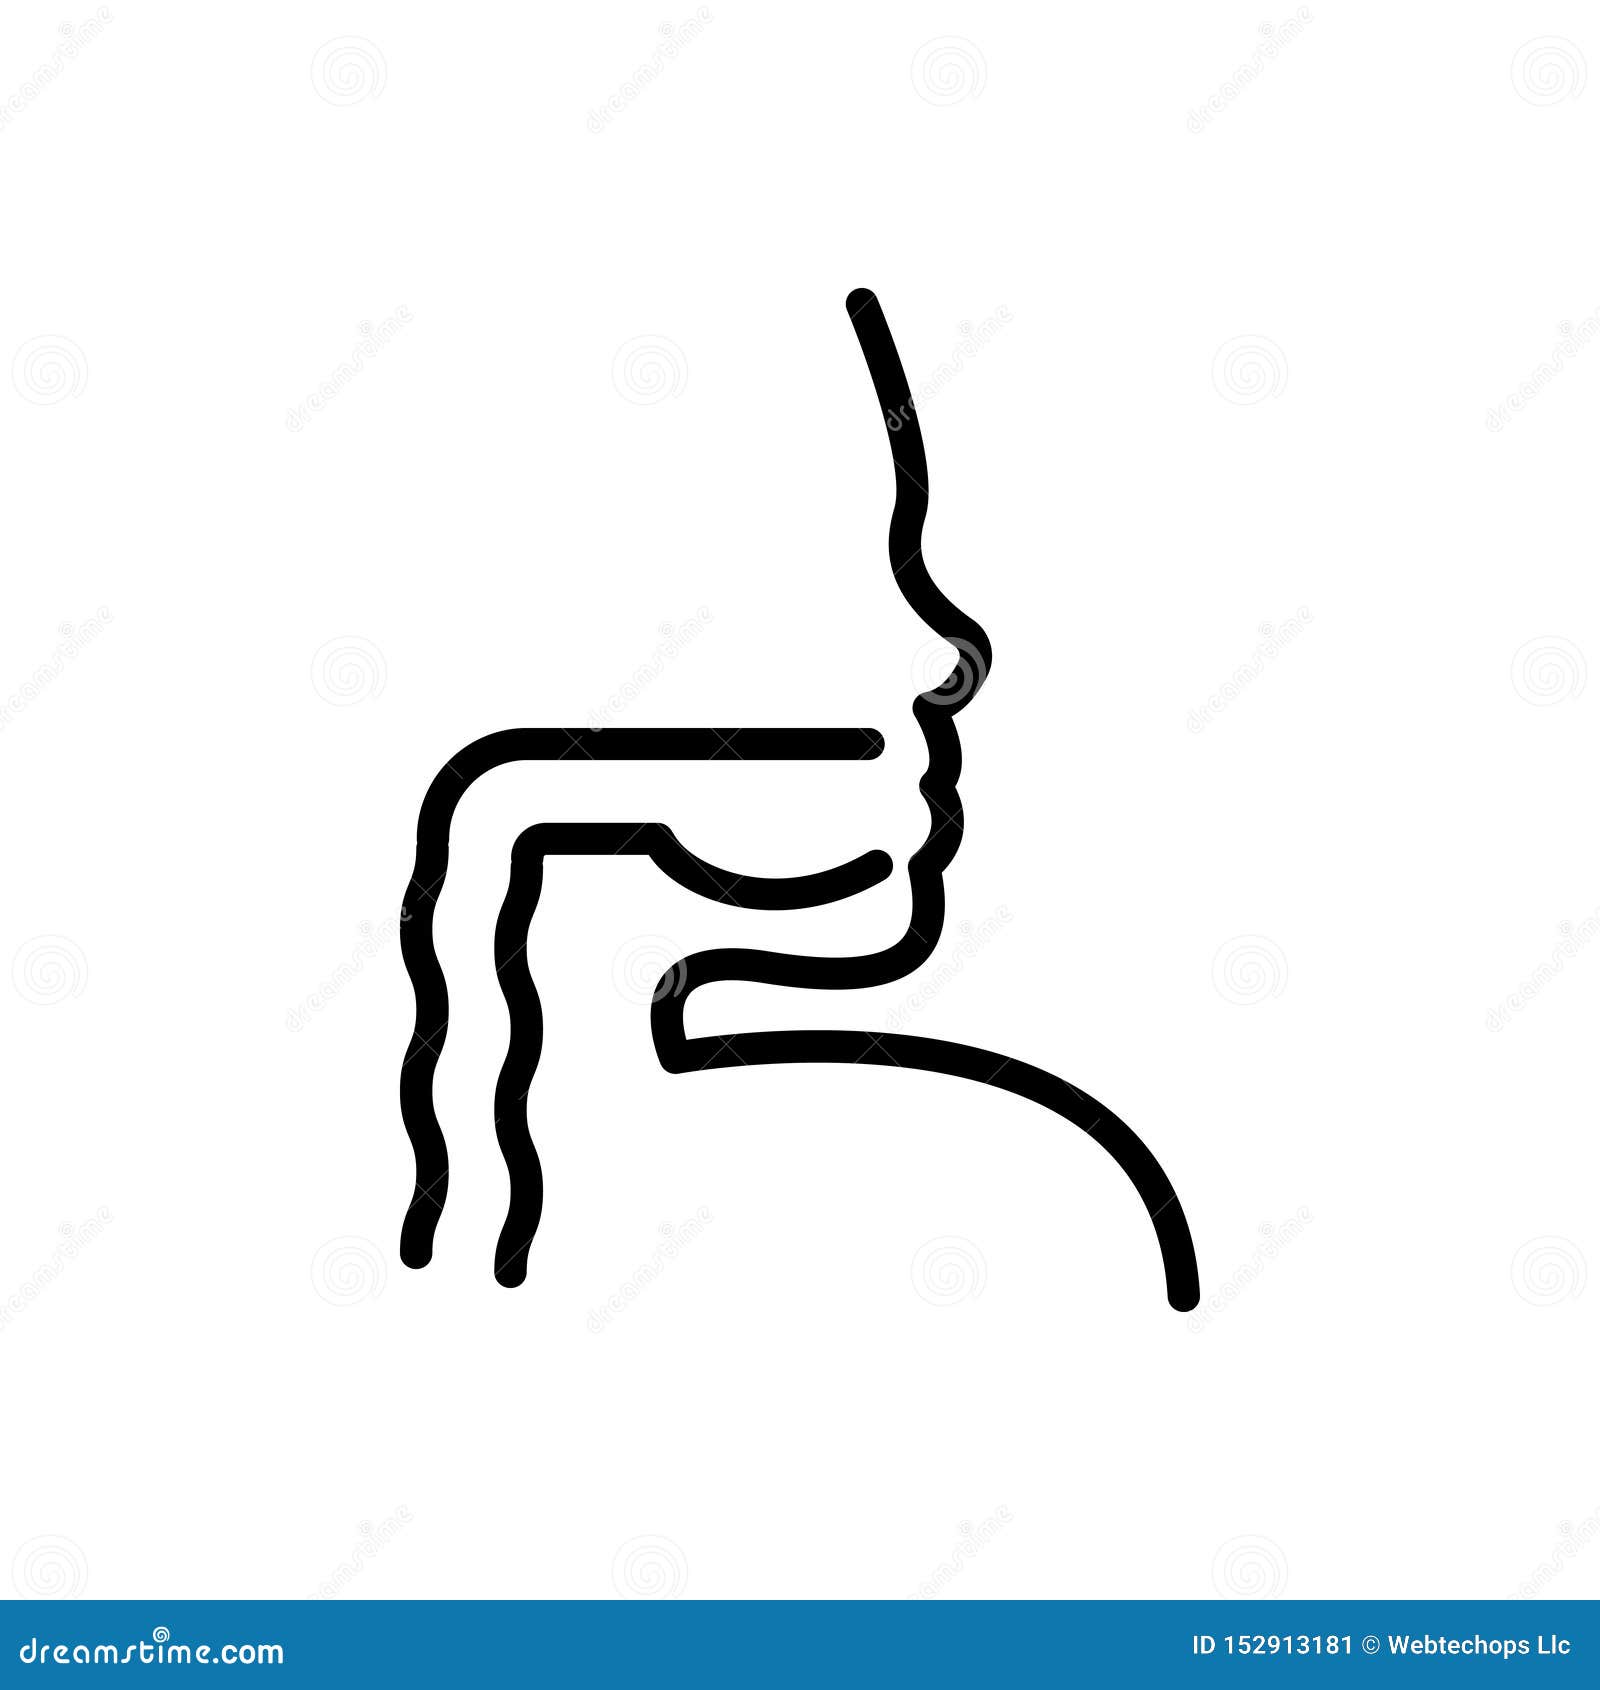 black line icon for pharynx, esophagus and mouth